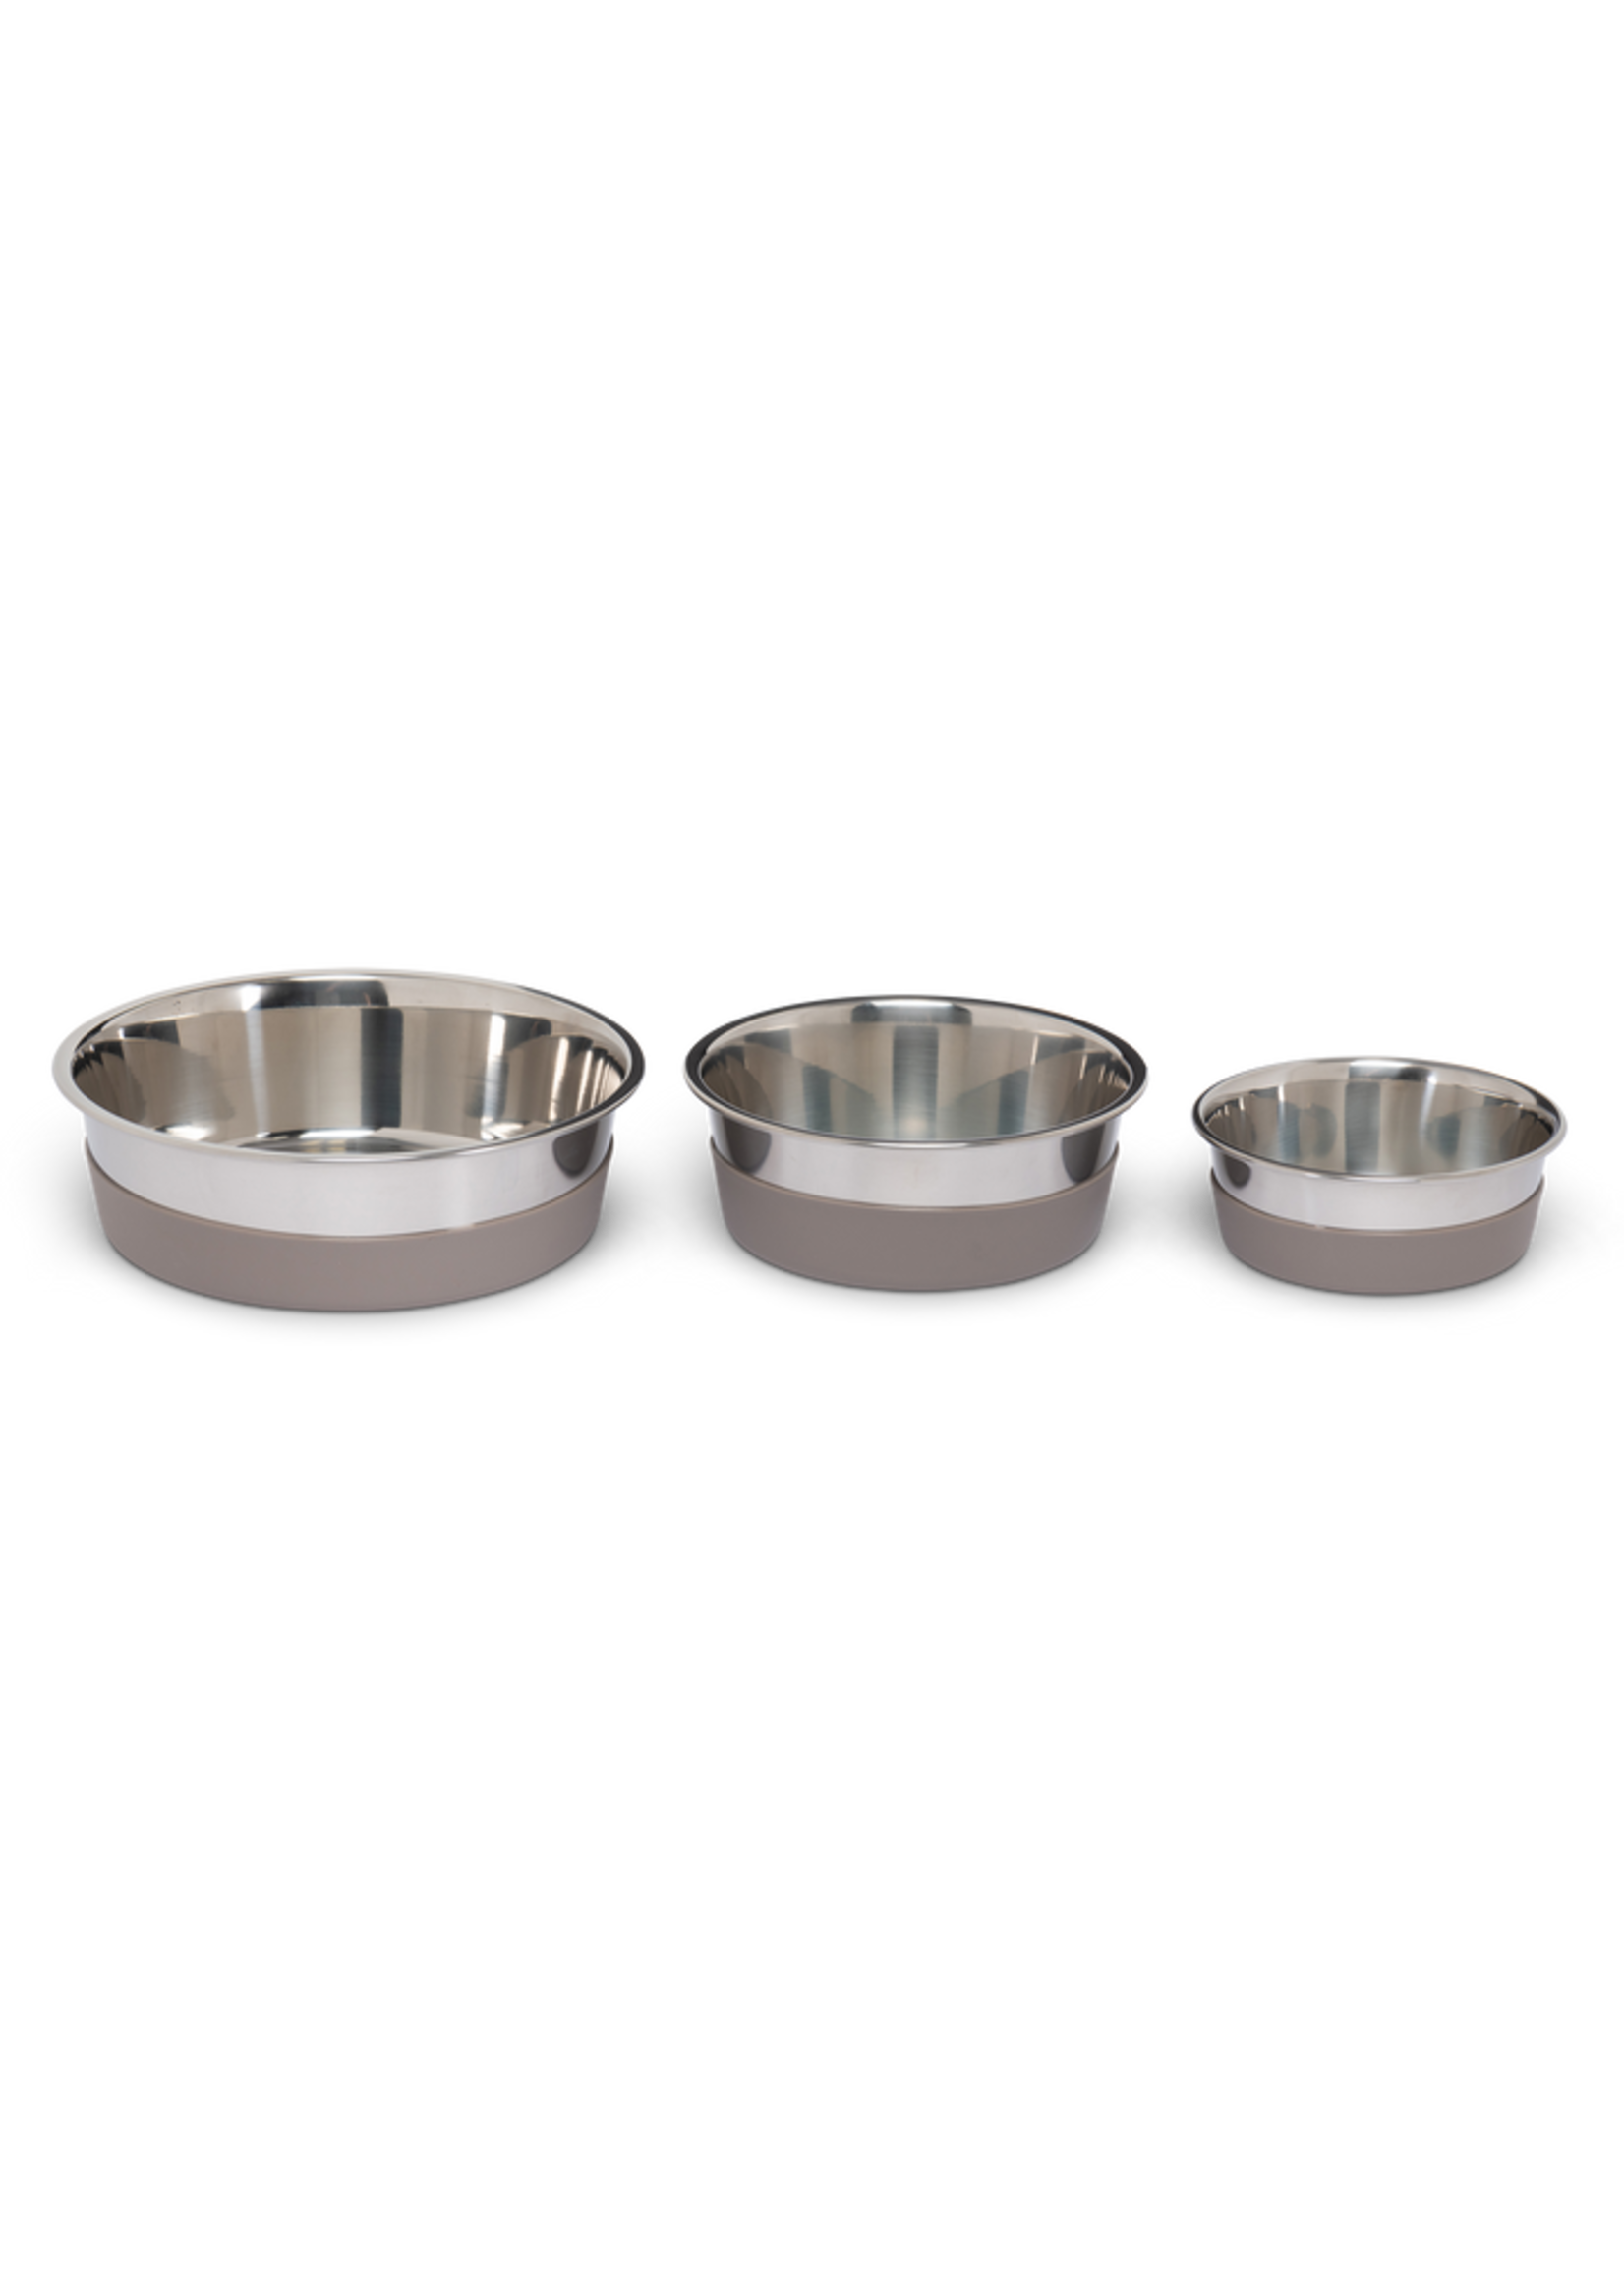 Messy Mutts Messy Mutts Stainless Heavy Gauge Bowl w/ Silicone Bottom